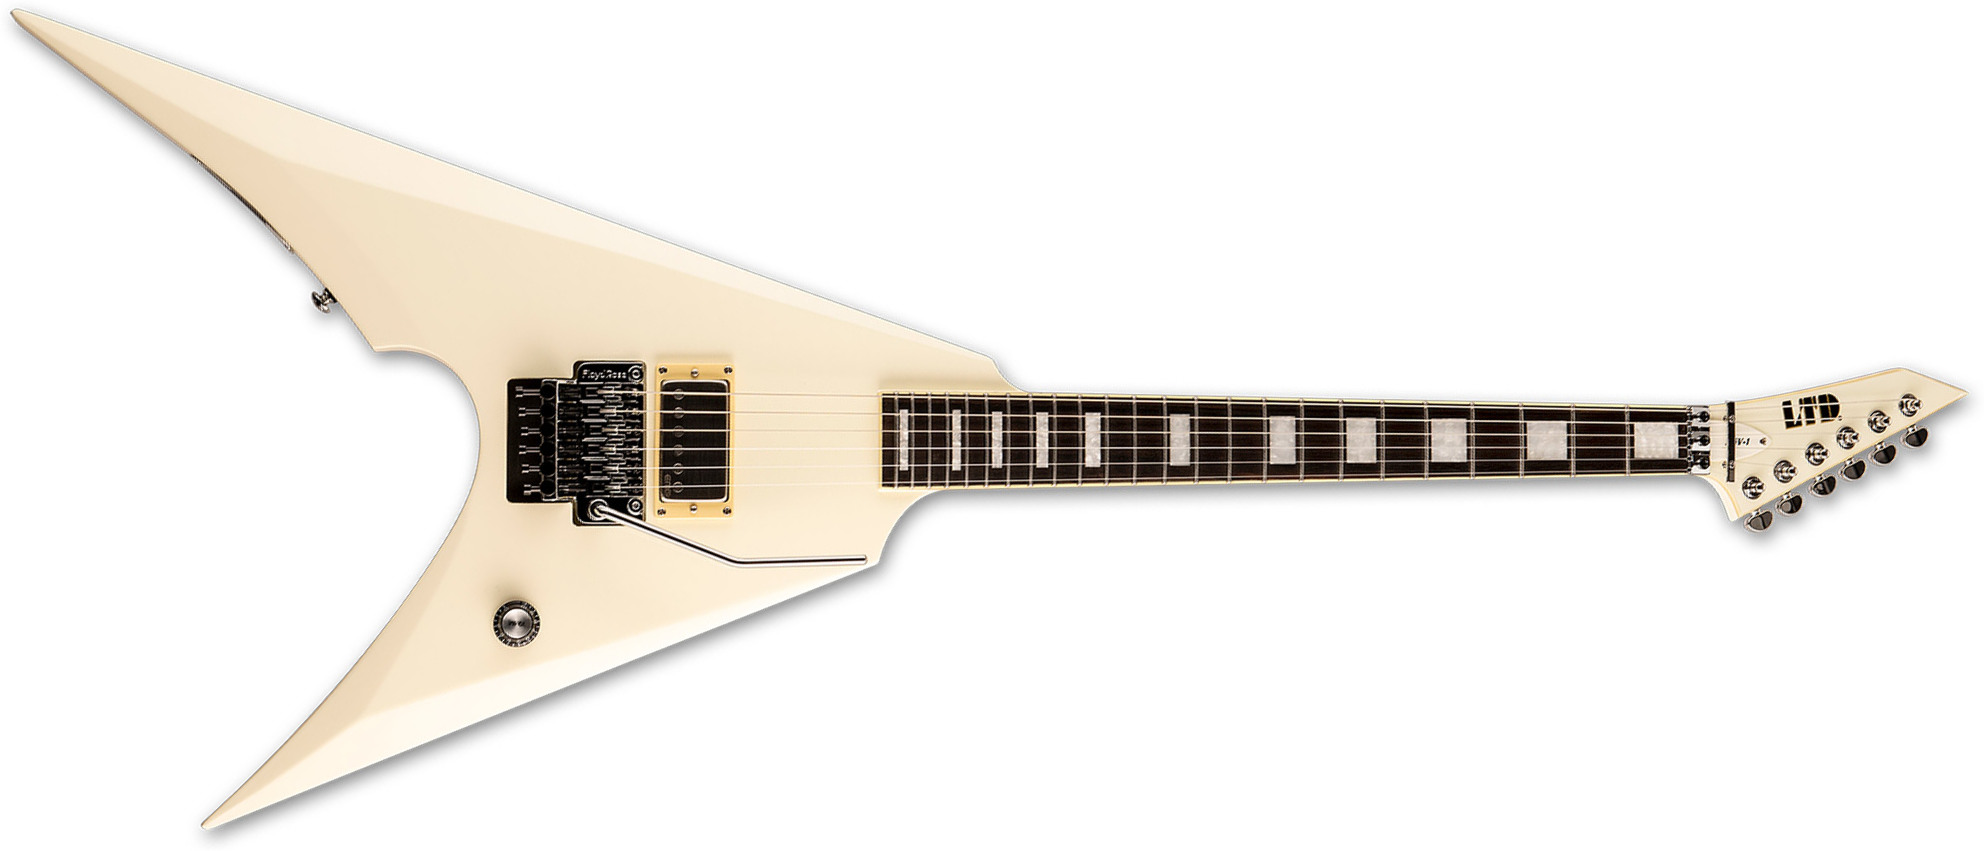 Ltd Mike Schleibaum Msv-1 Signature 1h Emg Fr Eb - Olympic White - Signature electric guitar - Main picture